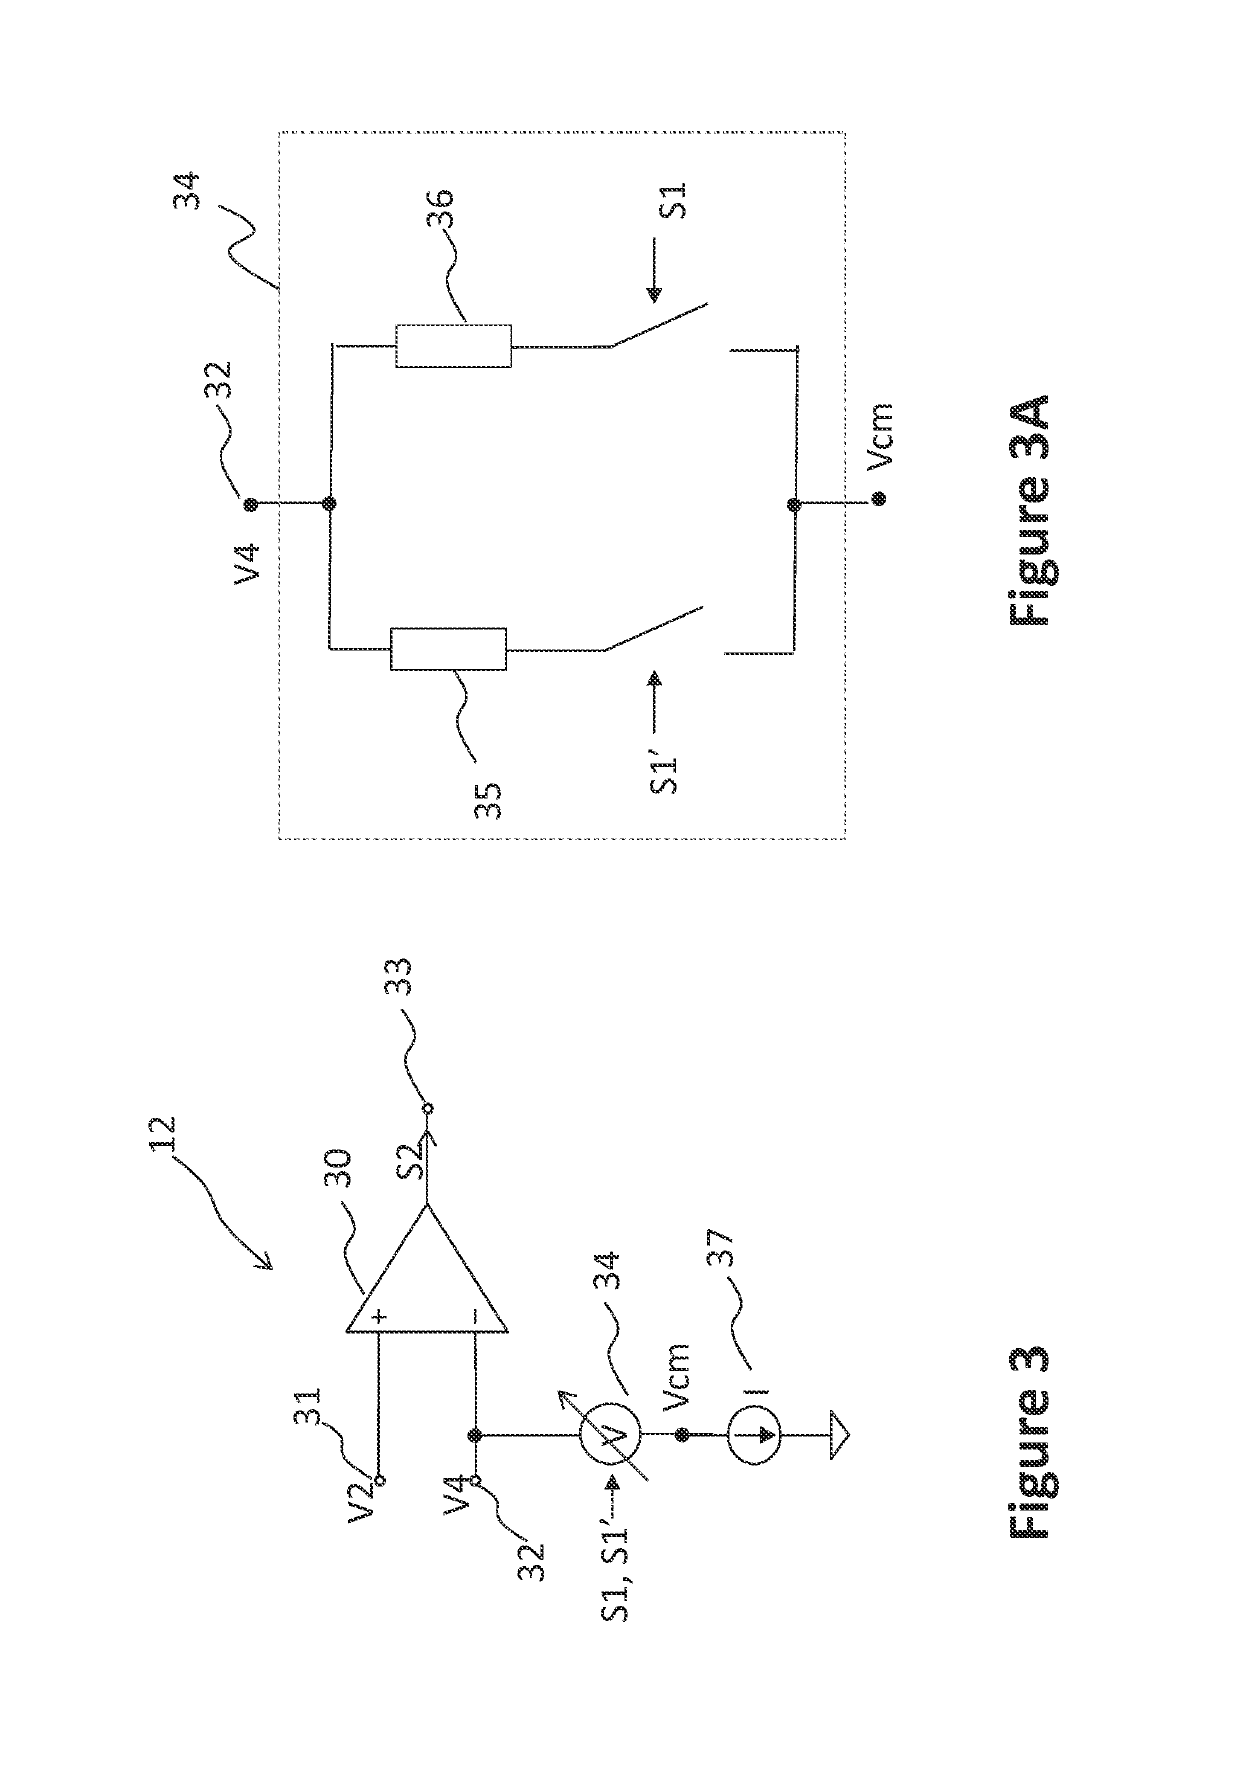 Integrated calibration circuit and a method for calibration of a filter circuit